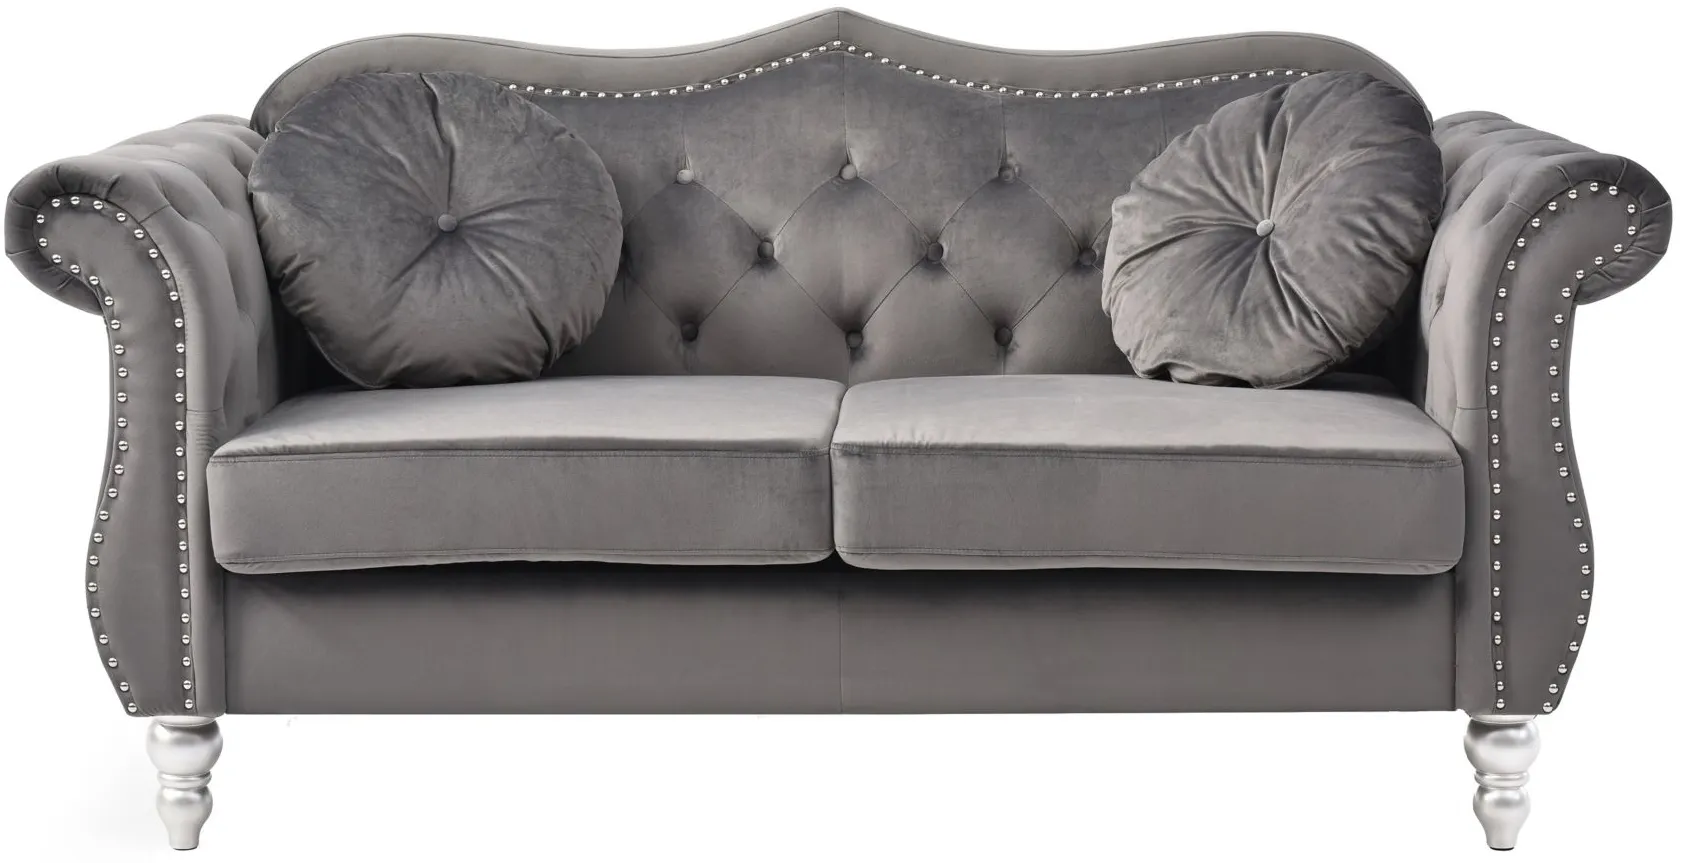 Hollywood Loveseat in Dark Gray by Glory Furniture